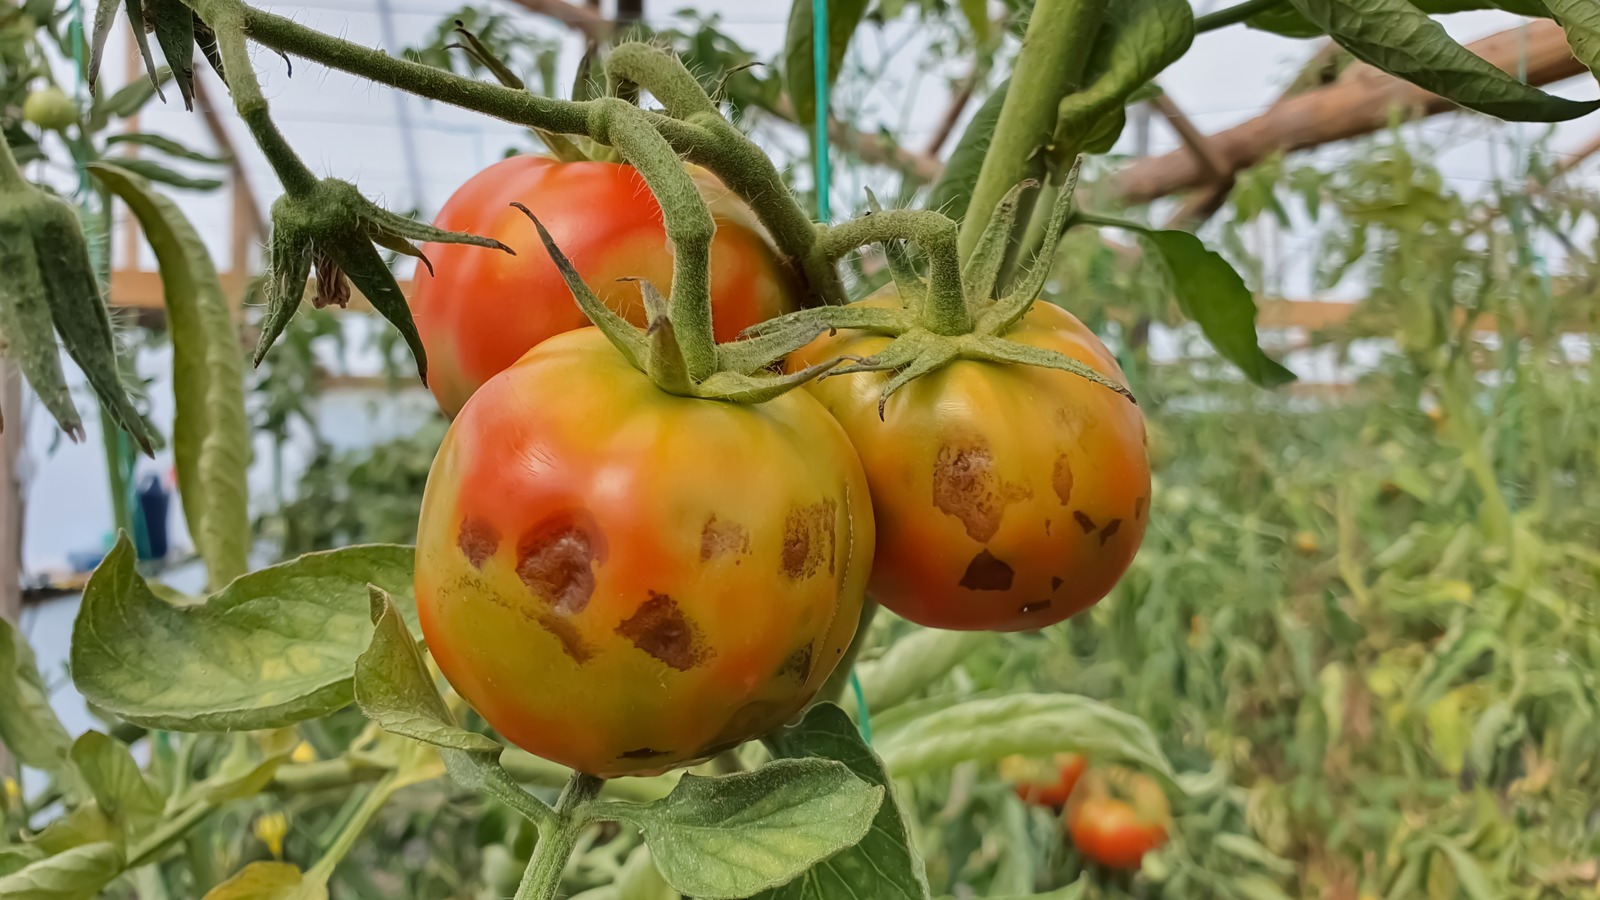 phytophthora on tomatoes